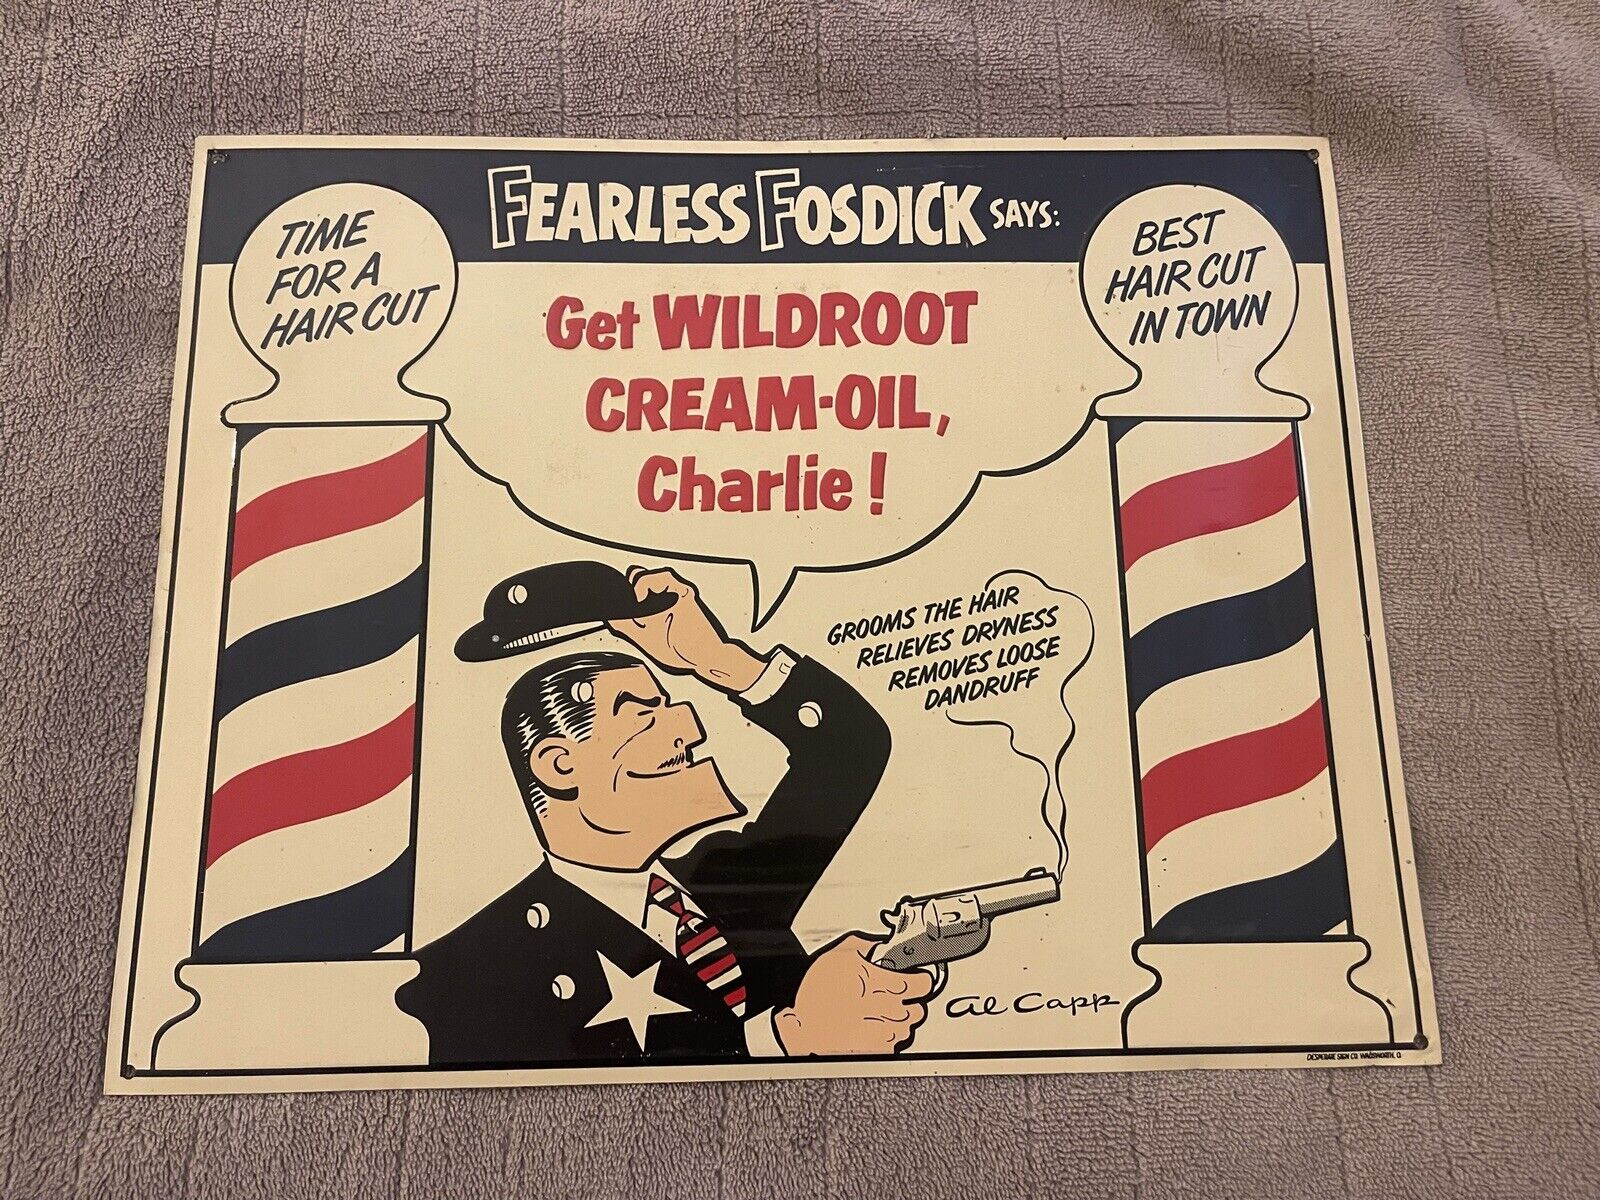 Vintage Fearless Fosdick Get Wildroot Cream-Oil Charlie Barber Shop Sign